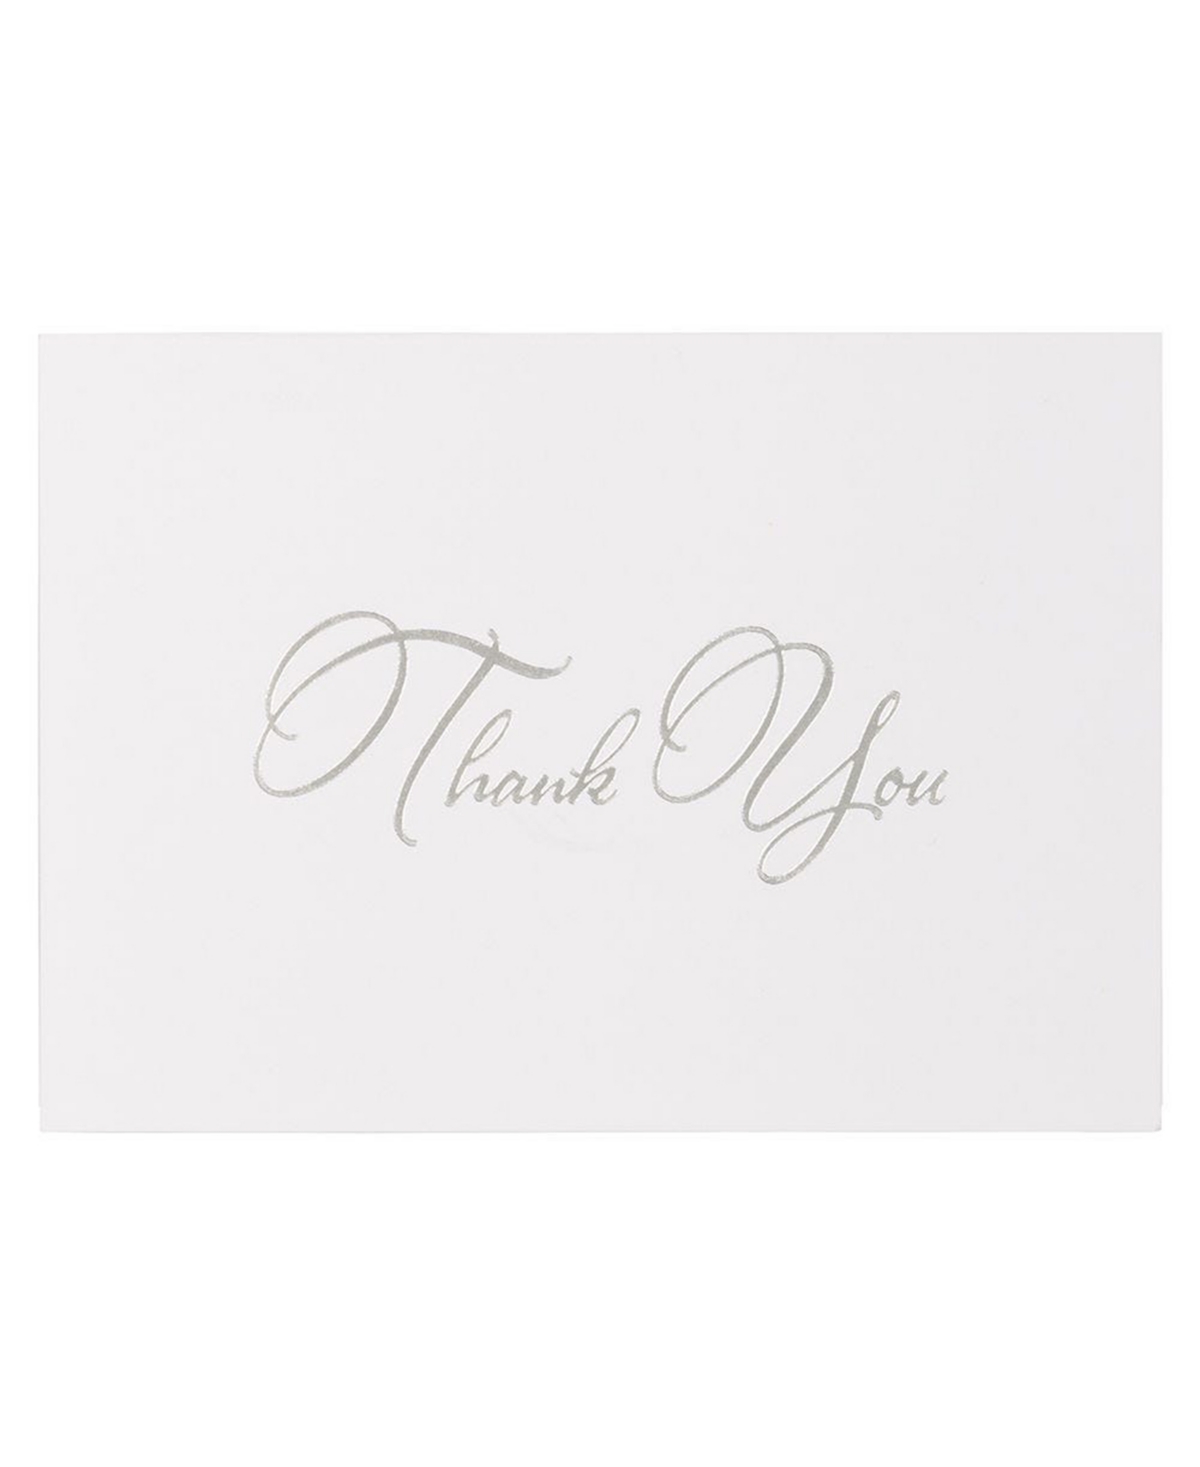 Thank You Card Sets - Silver-Tone Script Cards with Silver-Tone Star dream Envelopes - 25 Cards and Envelopes - Silver Foil